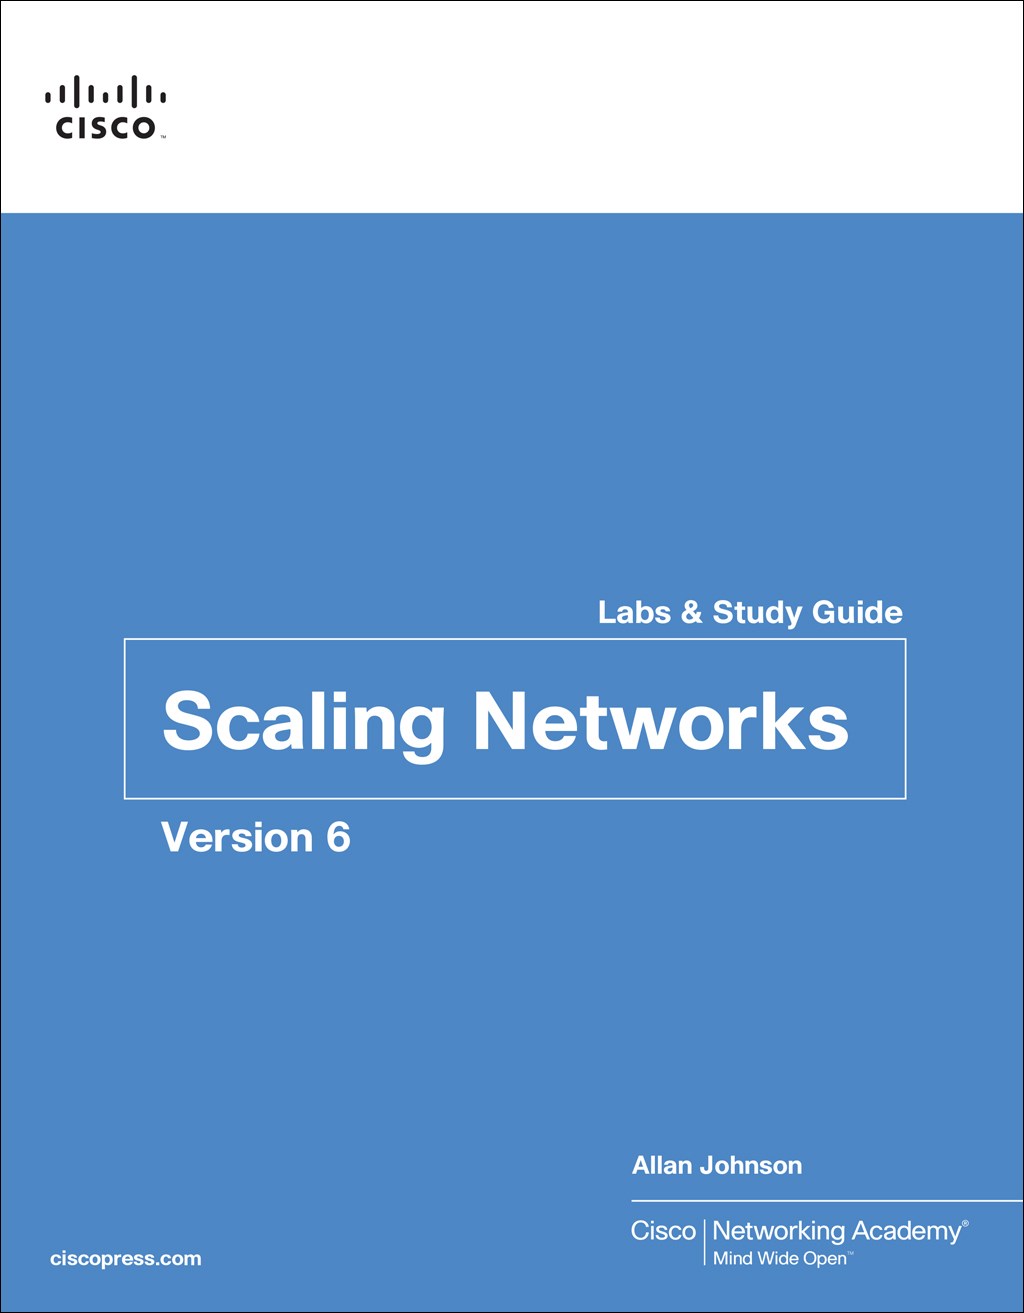 Scaling Networks v6 Labs & Study Guide